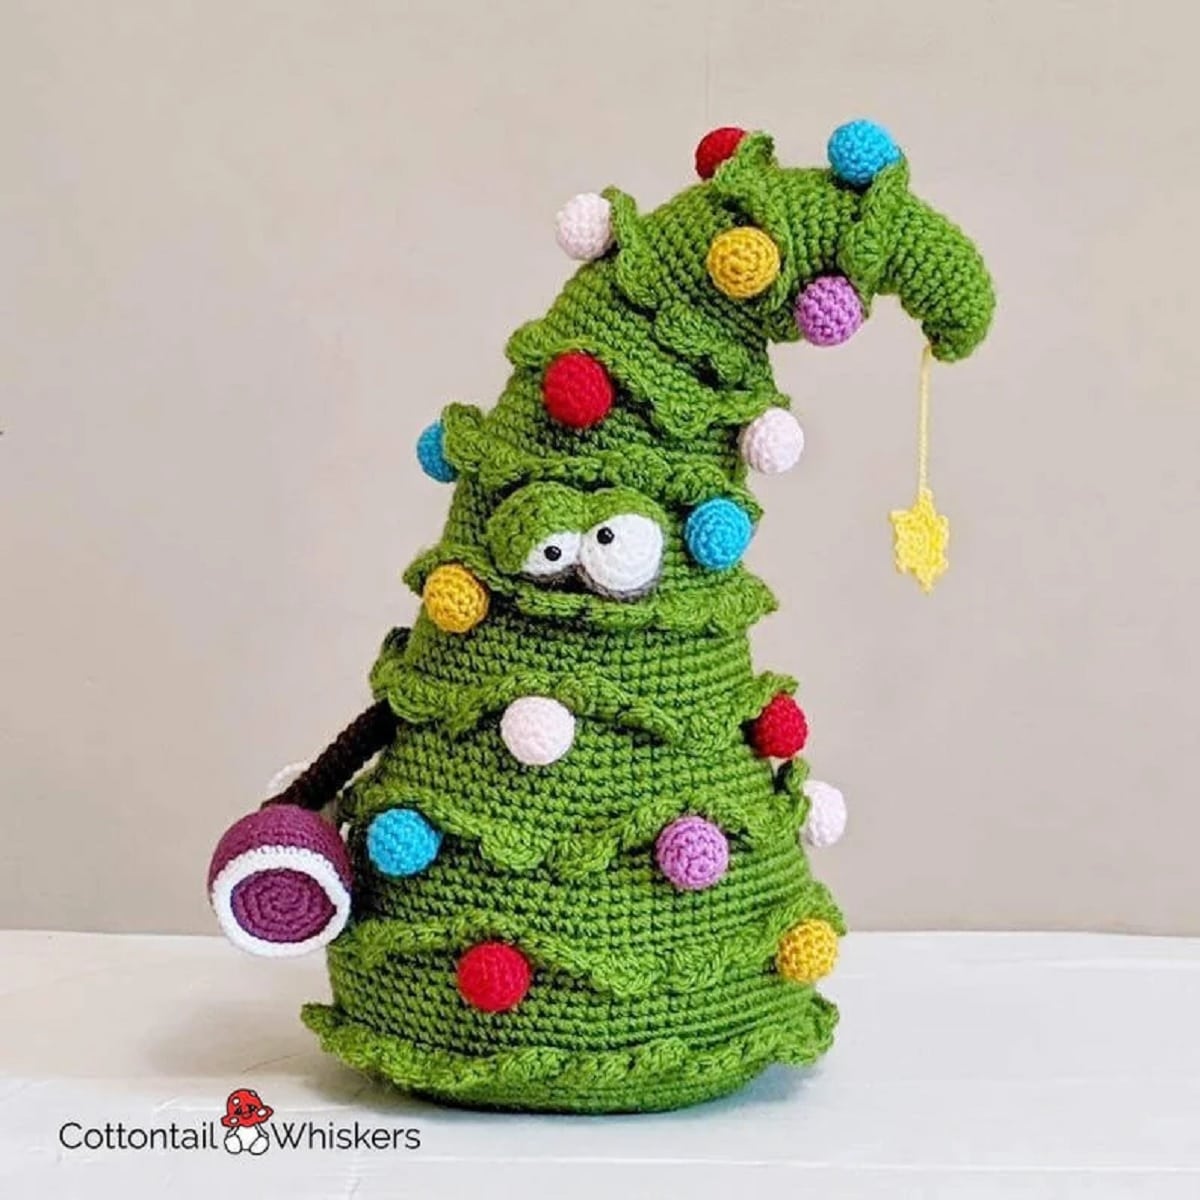 A large crochet green Christmas tree with drunk eyes in the middle and blue, pink, purple, and white balls all over.